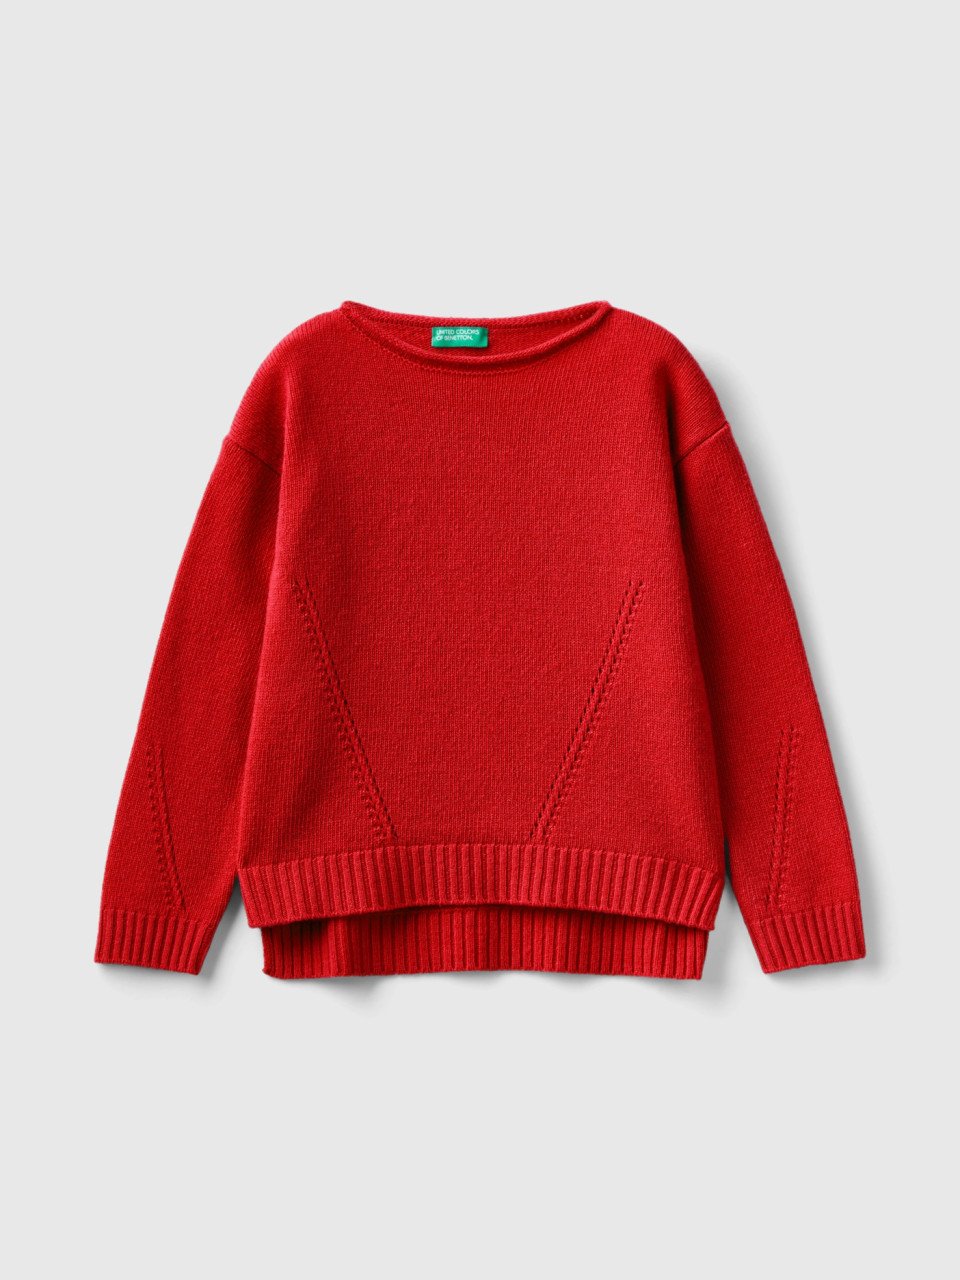 Benetton, Knit Sweater With Playful Stitching, Red, Kids